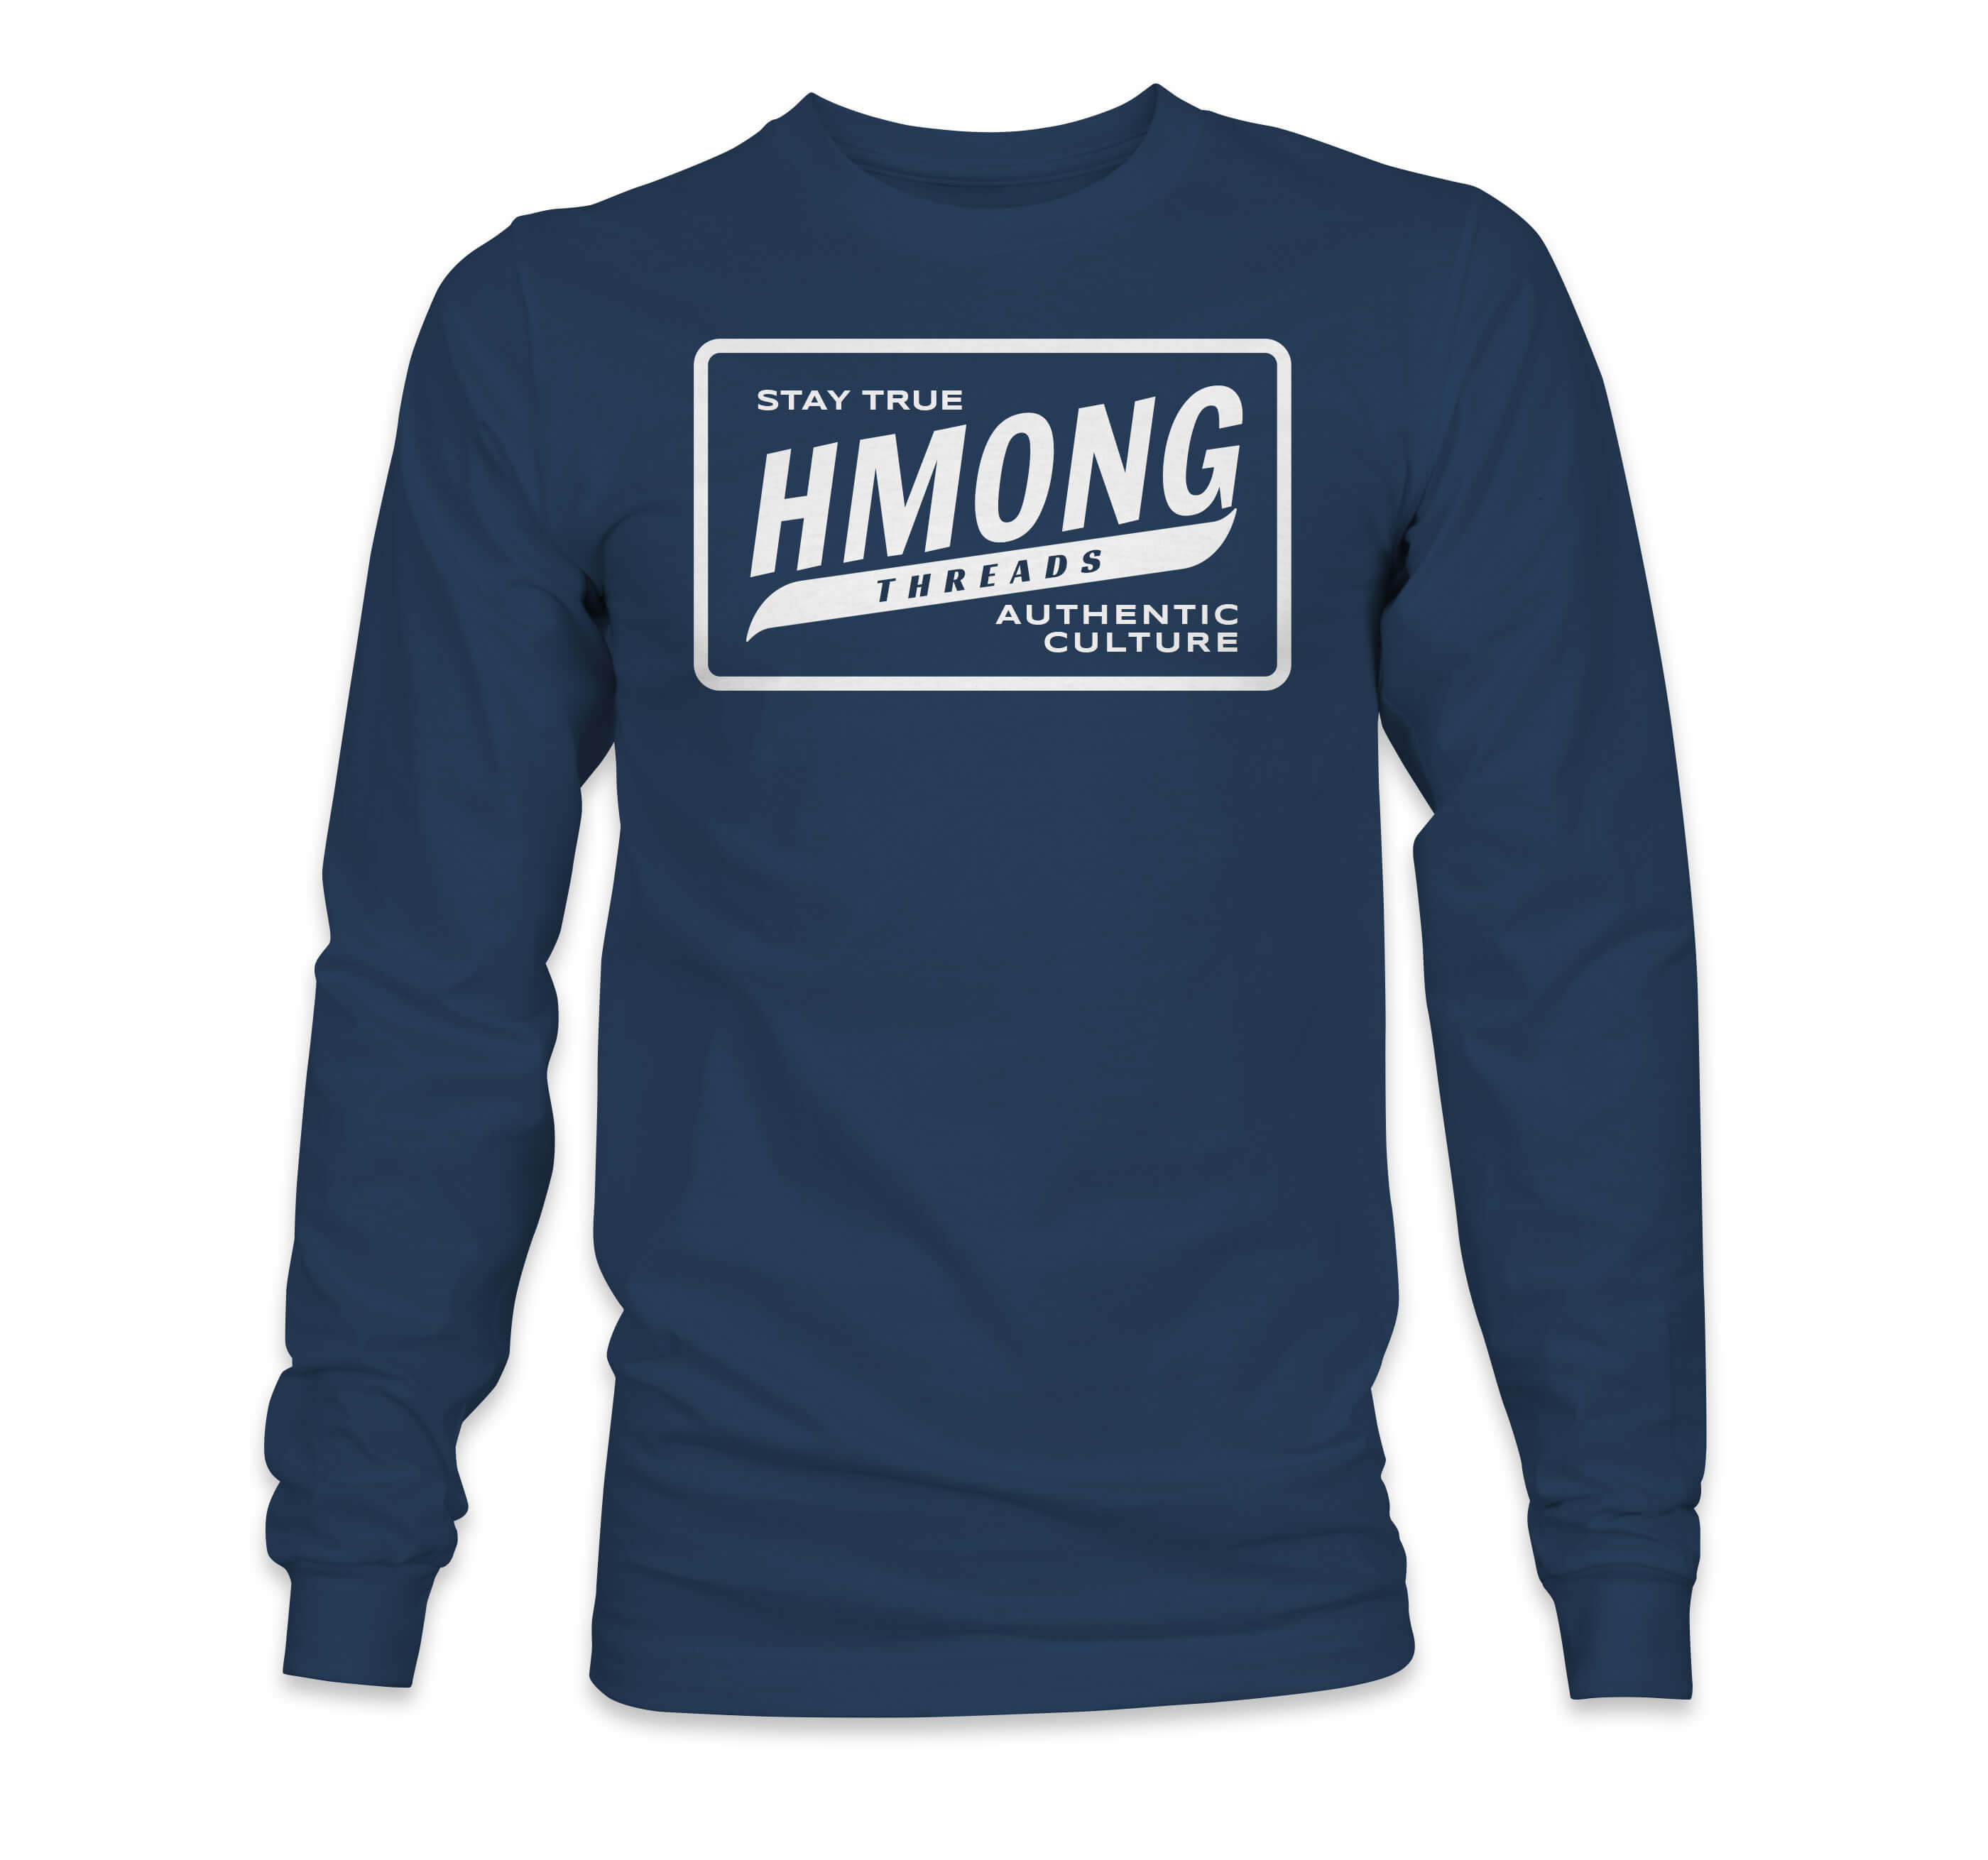 Hmong Threads Stay True - Long Sleeves Tee NAVY